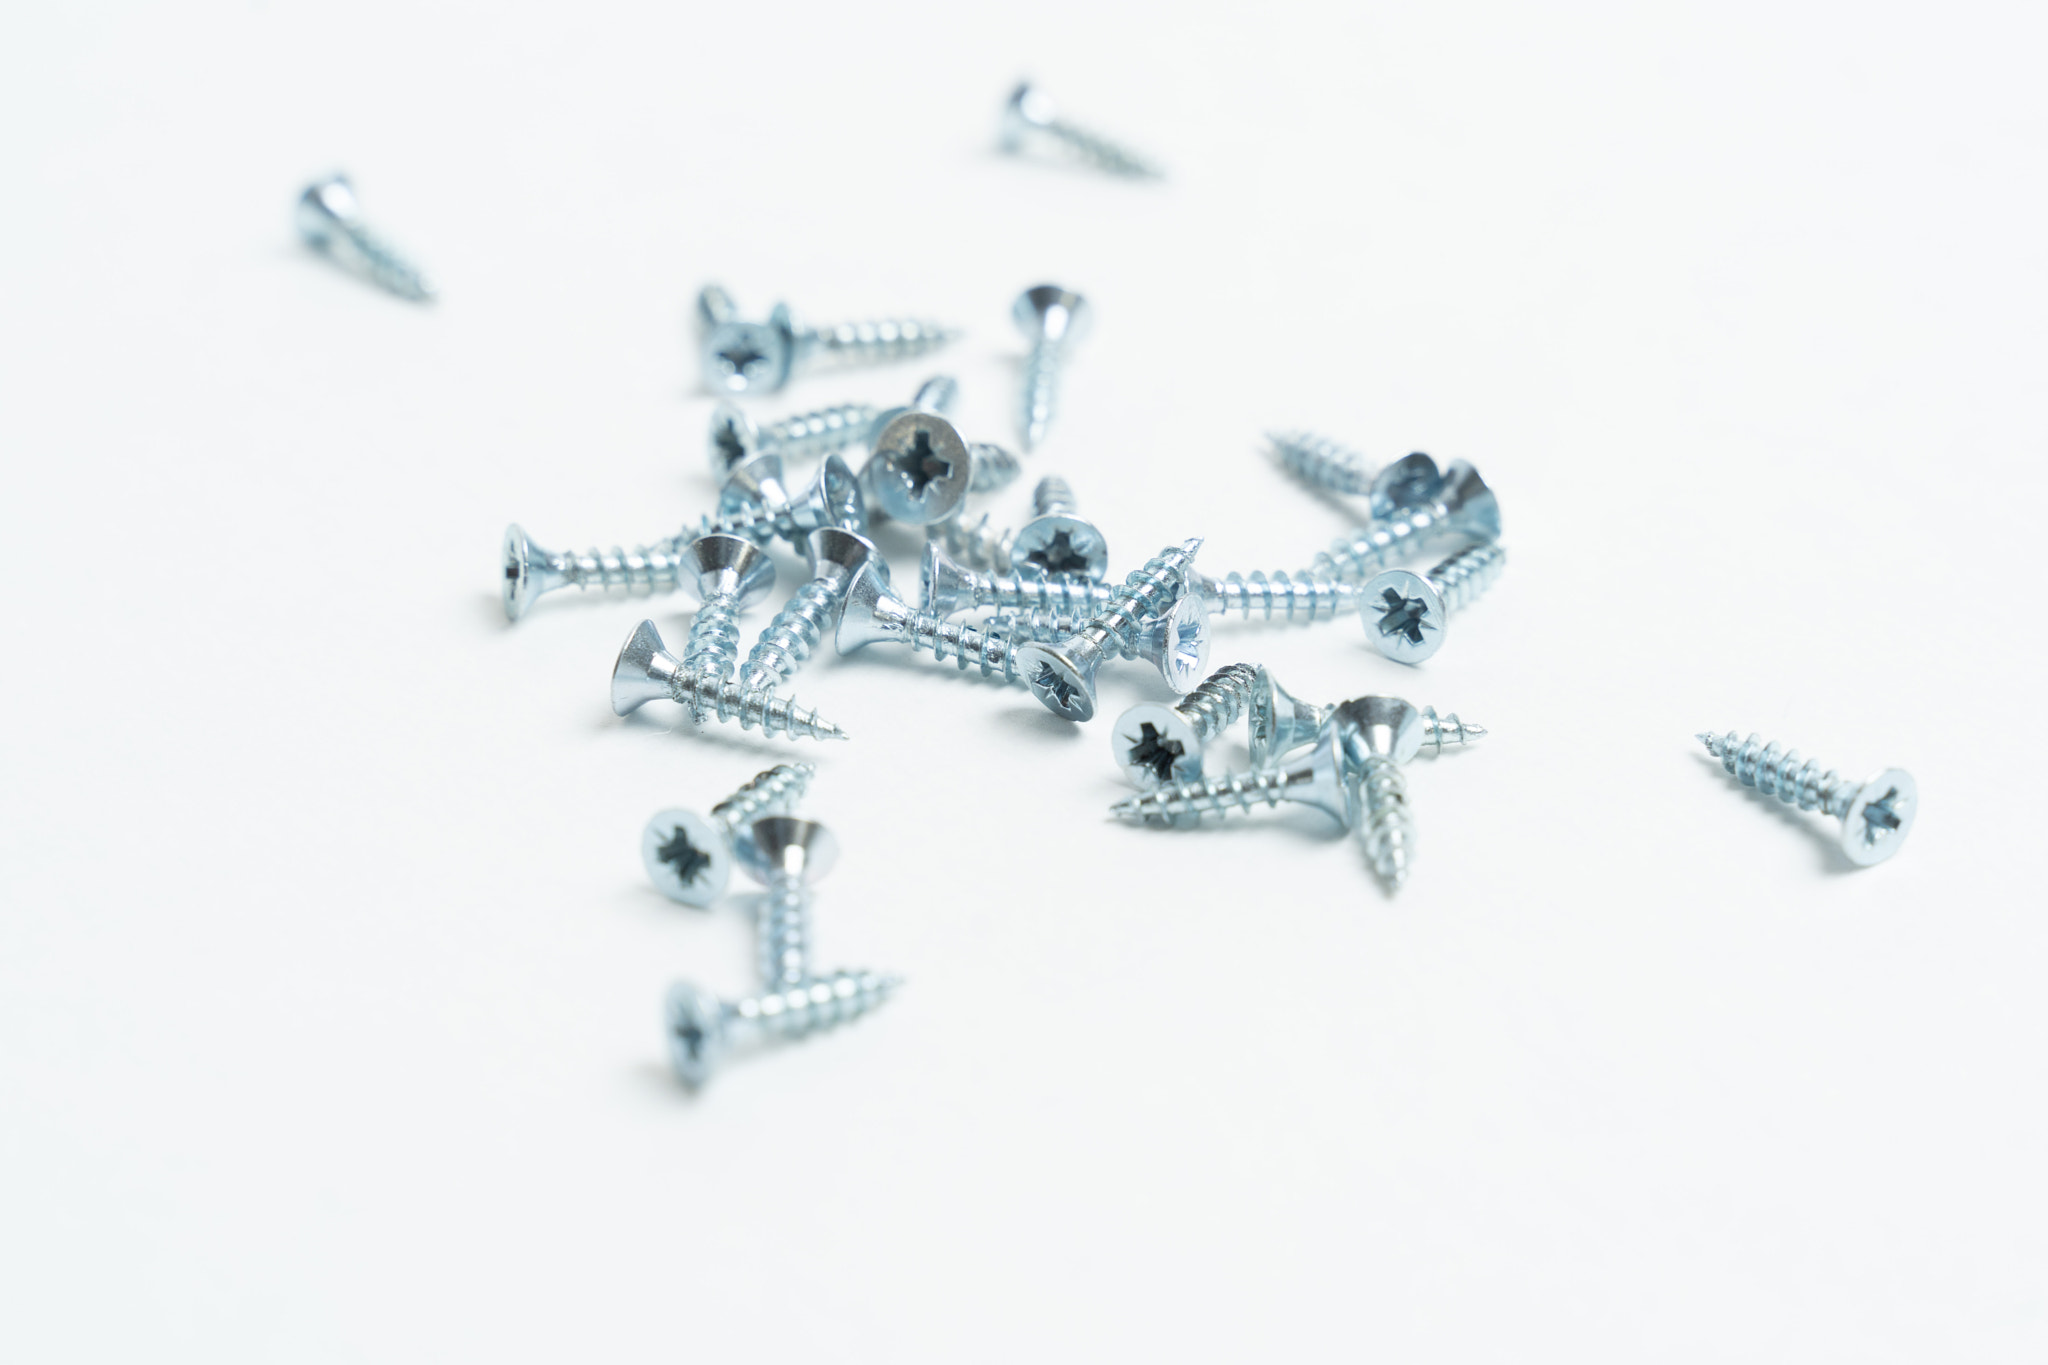 metal screws 16 mm long bolts for furniture on a white background